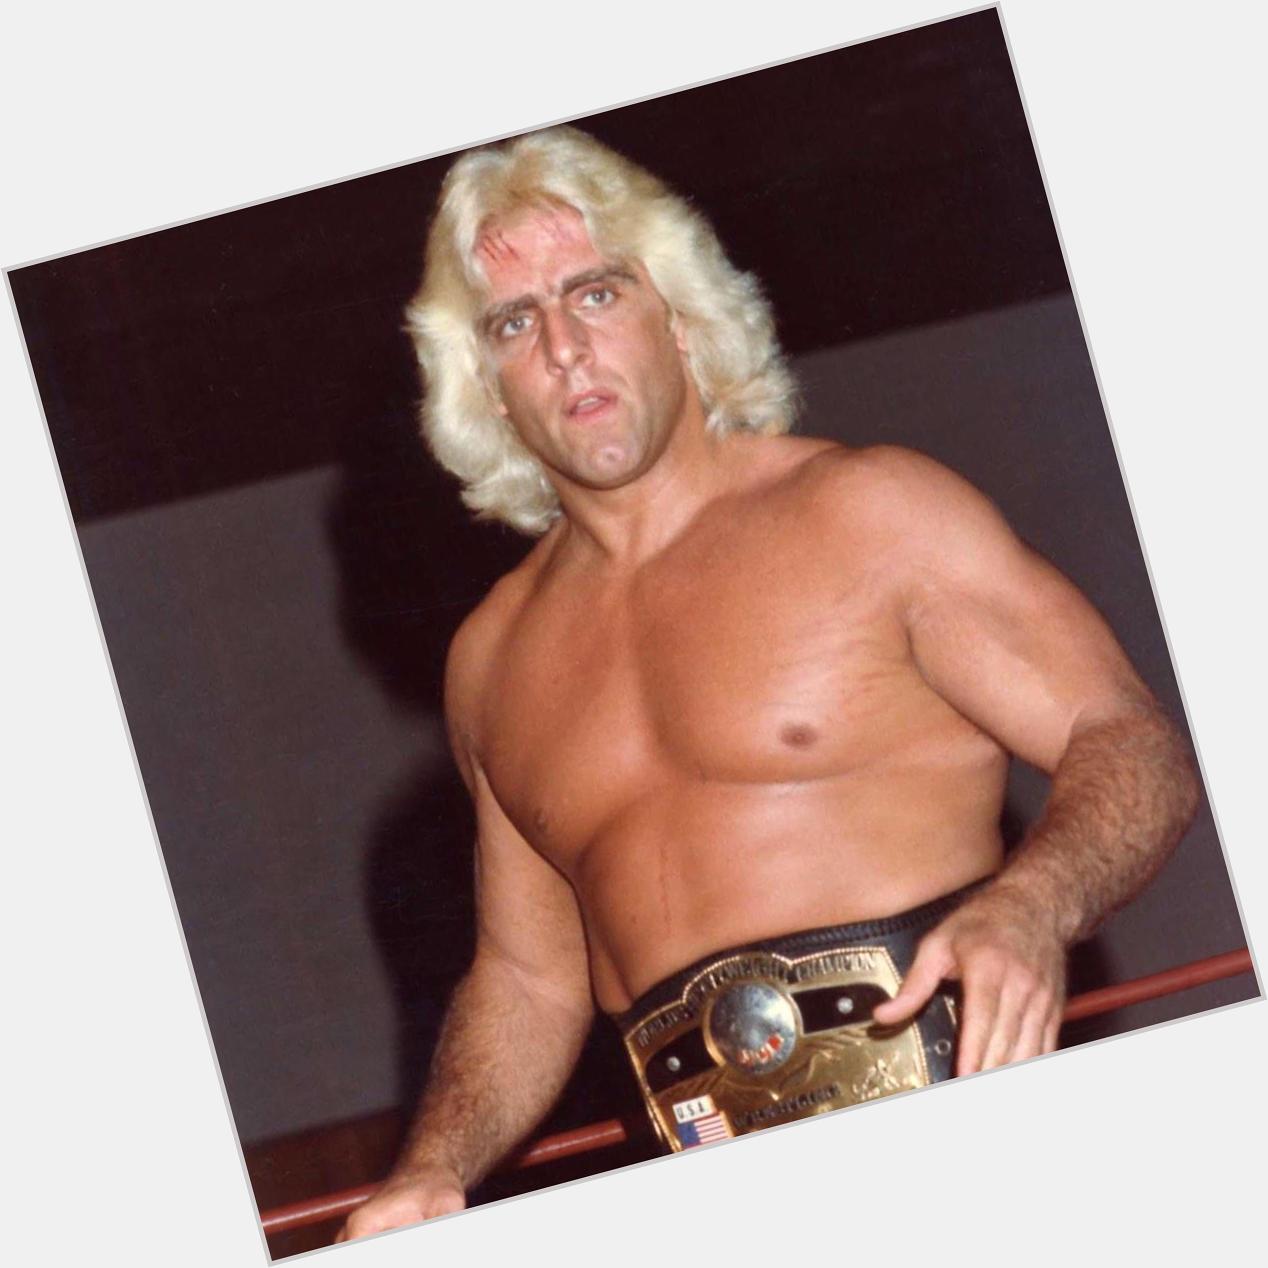 Happy bday to Ric Flair  